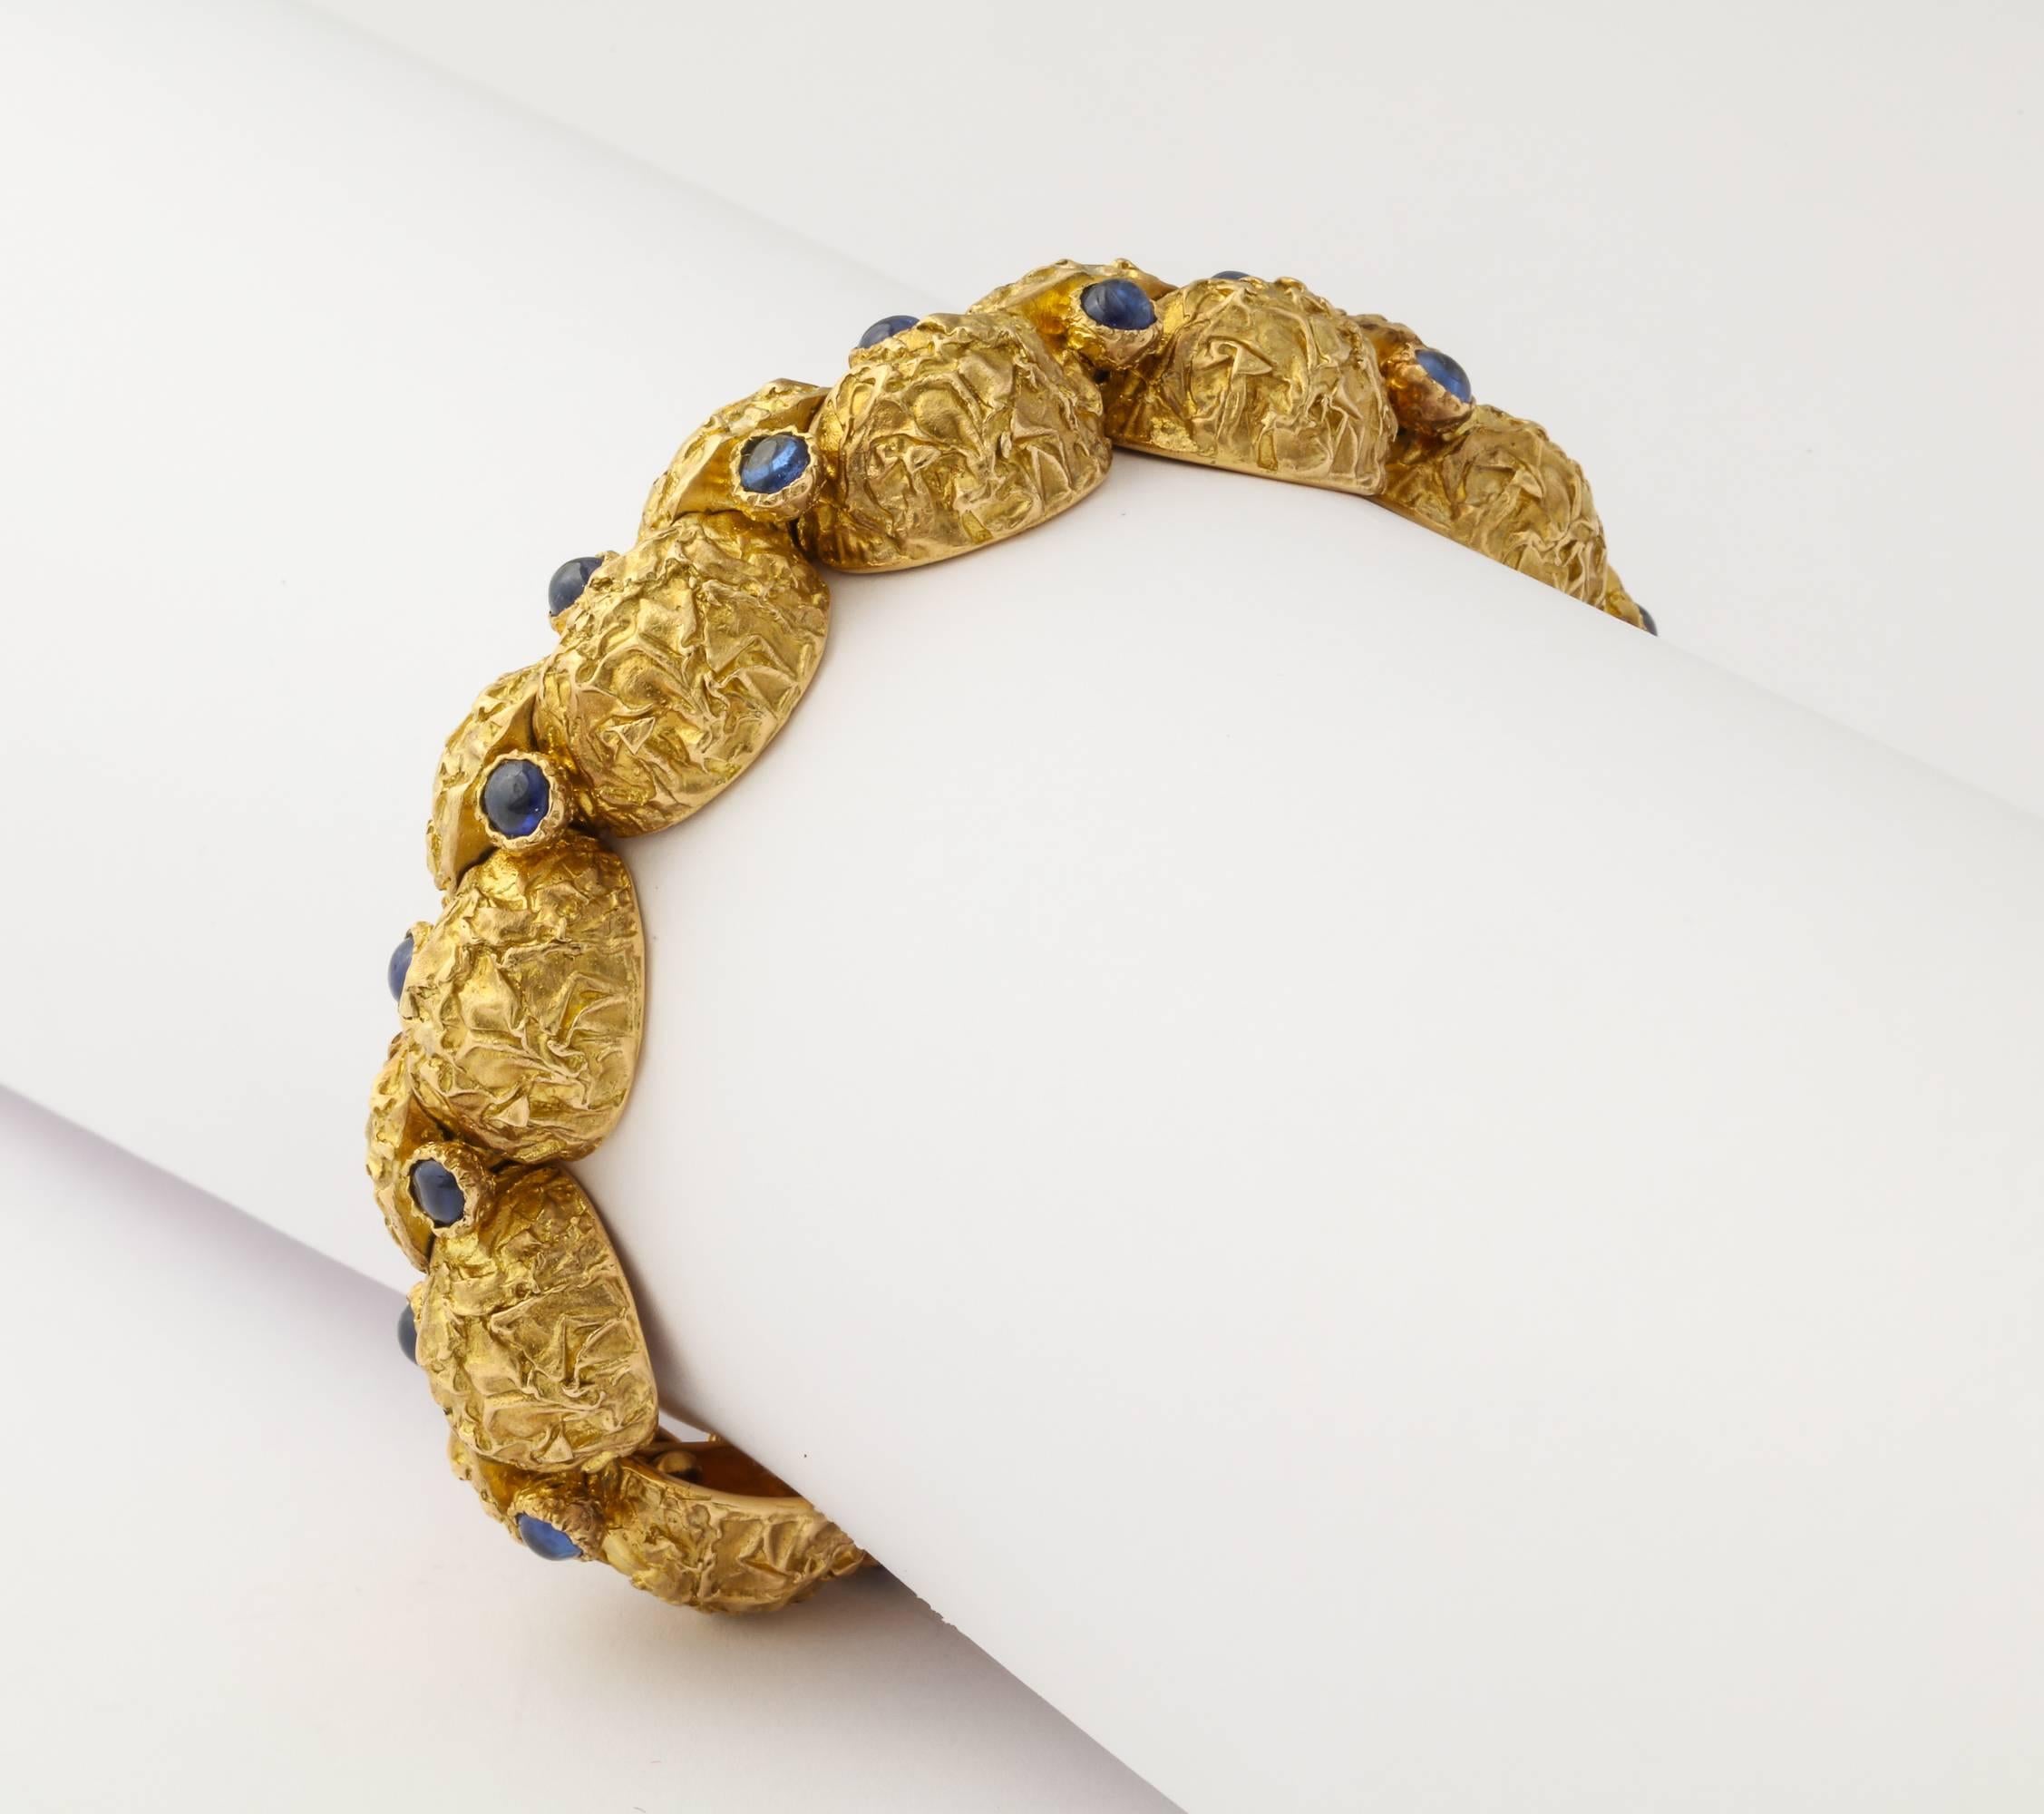 A modern and unusual 1970s bracelet from Cartier-Paris with deeply textured finish on quarter round segments of 18K gold each set with a cabochon sapphire and hinged to move independently and comfortably around the wrist. Measuring 7 1/2 inches